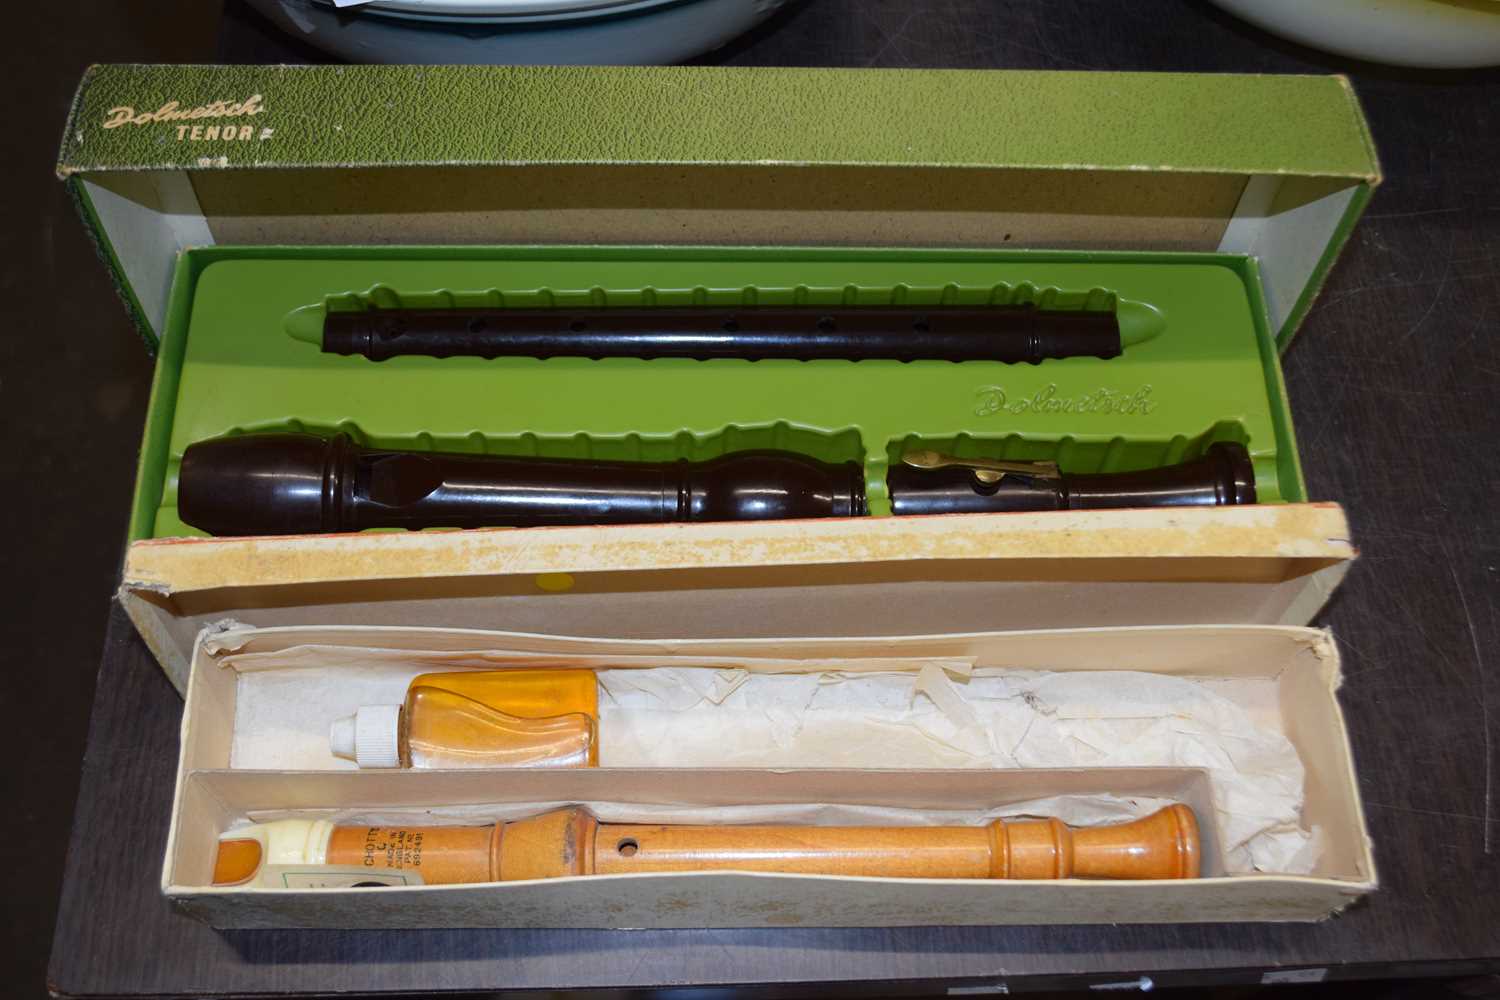 Two boxed recorders, one is a Dolmetsch Tenor and the other is an Adler